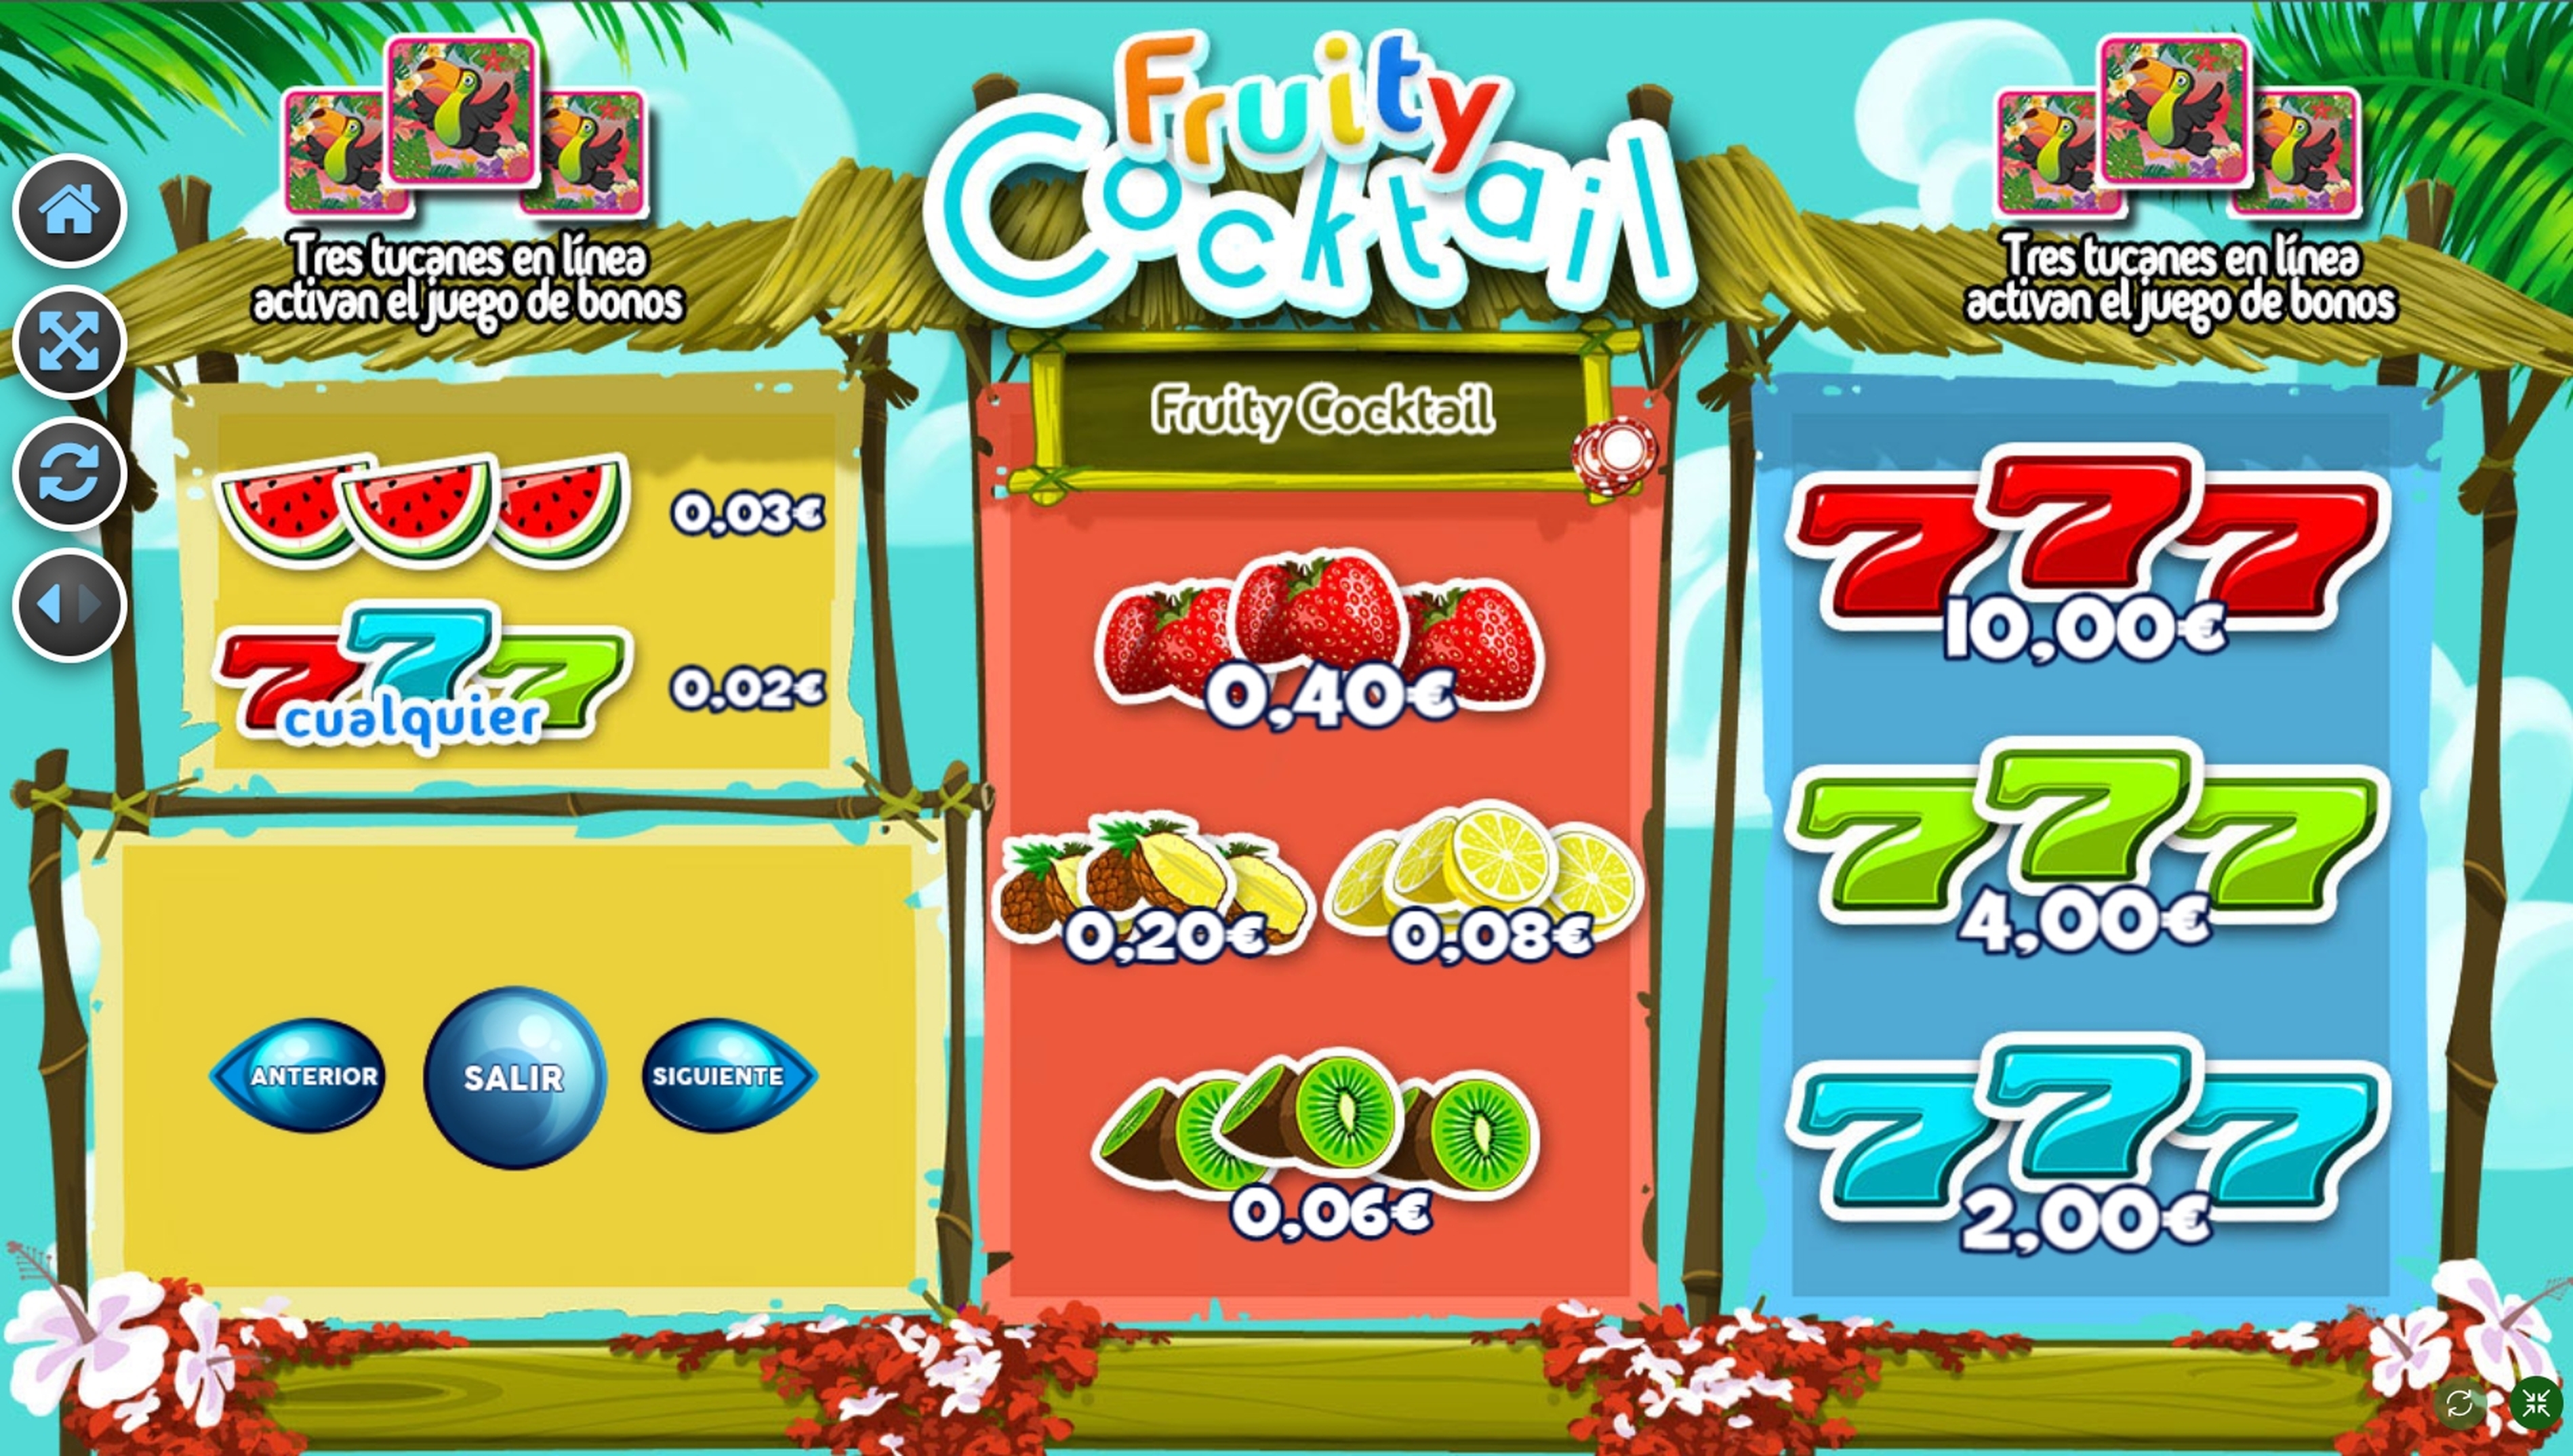 Info of Fruity Cocktail Slot Game by R. Franco